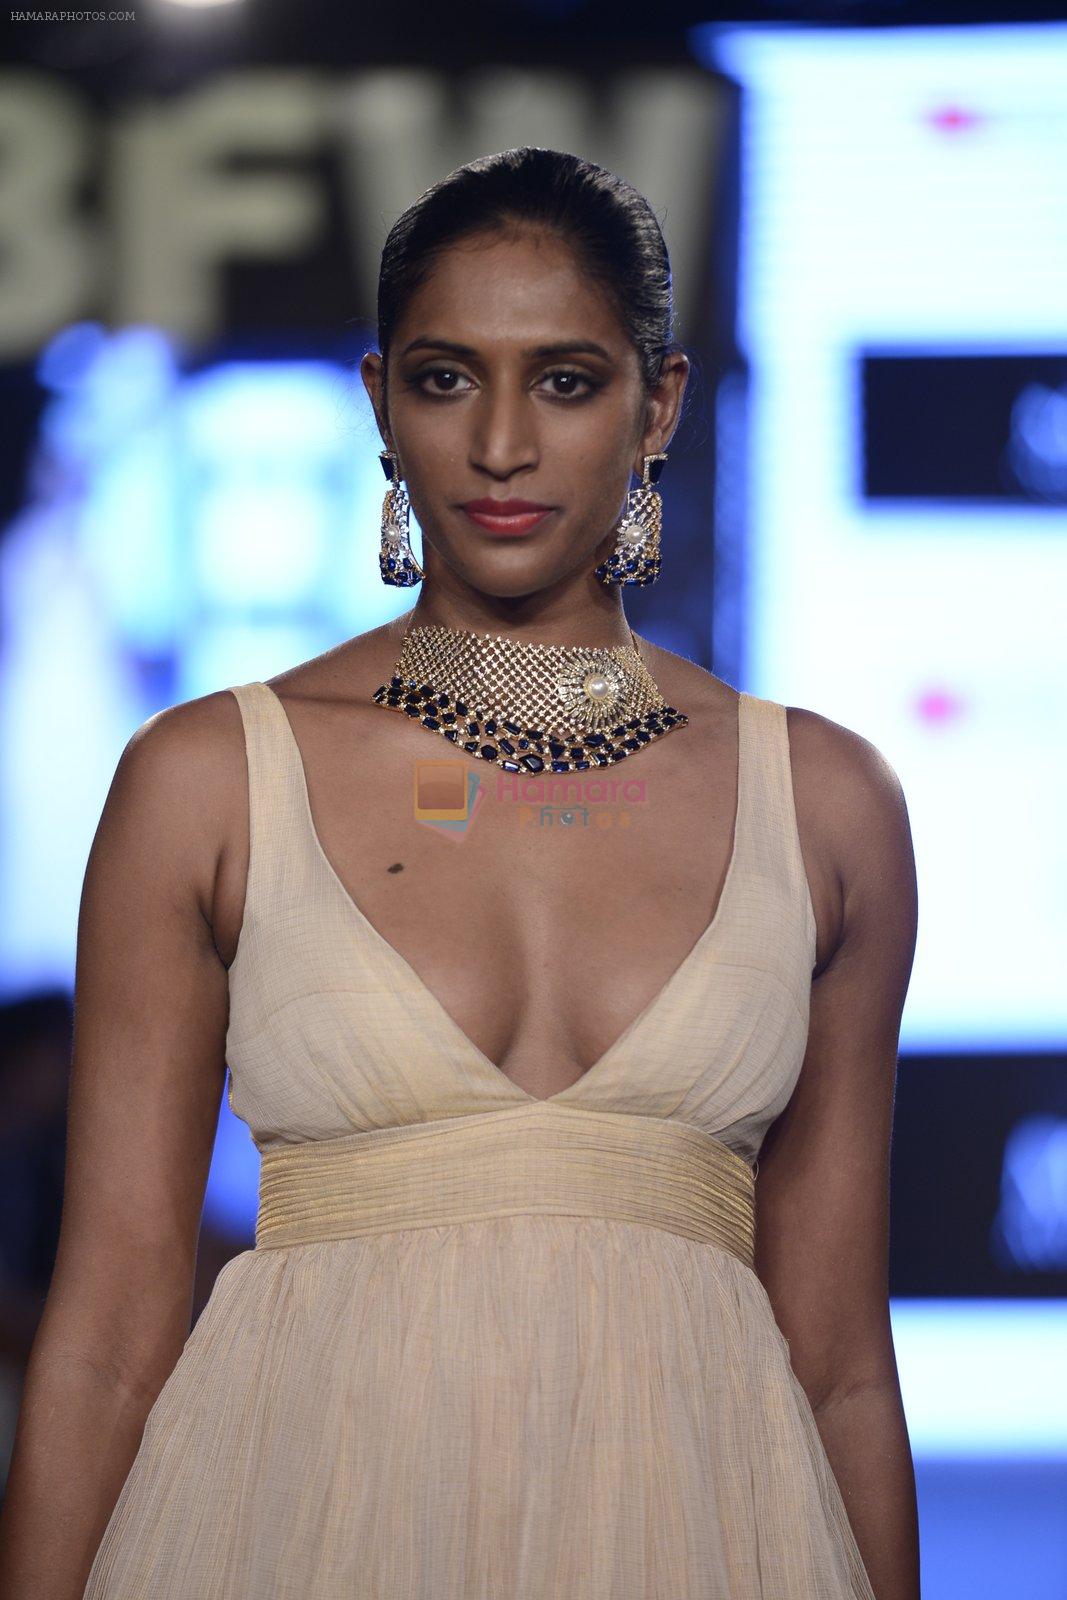 Model walk the ramp for Moni Aggarwal show on day 3 of Gionee India Beach Fashion Week on 31st Oct 2015